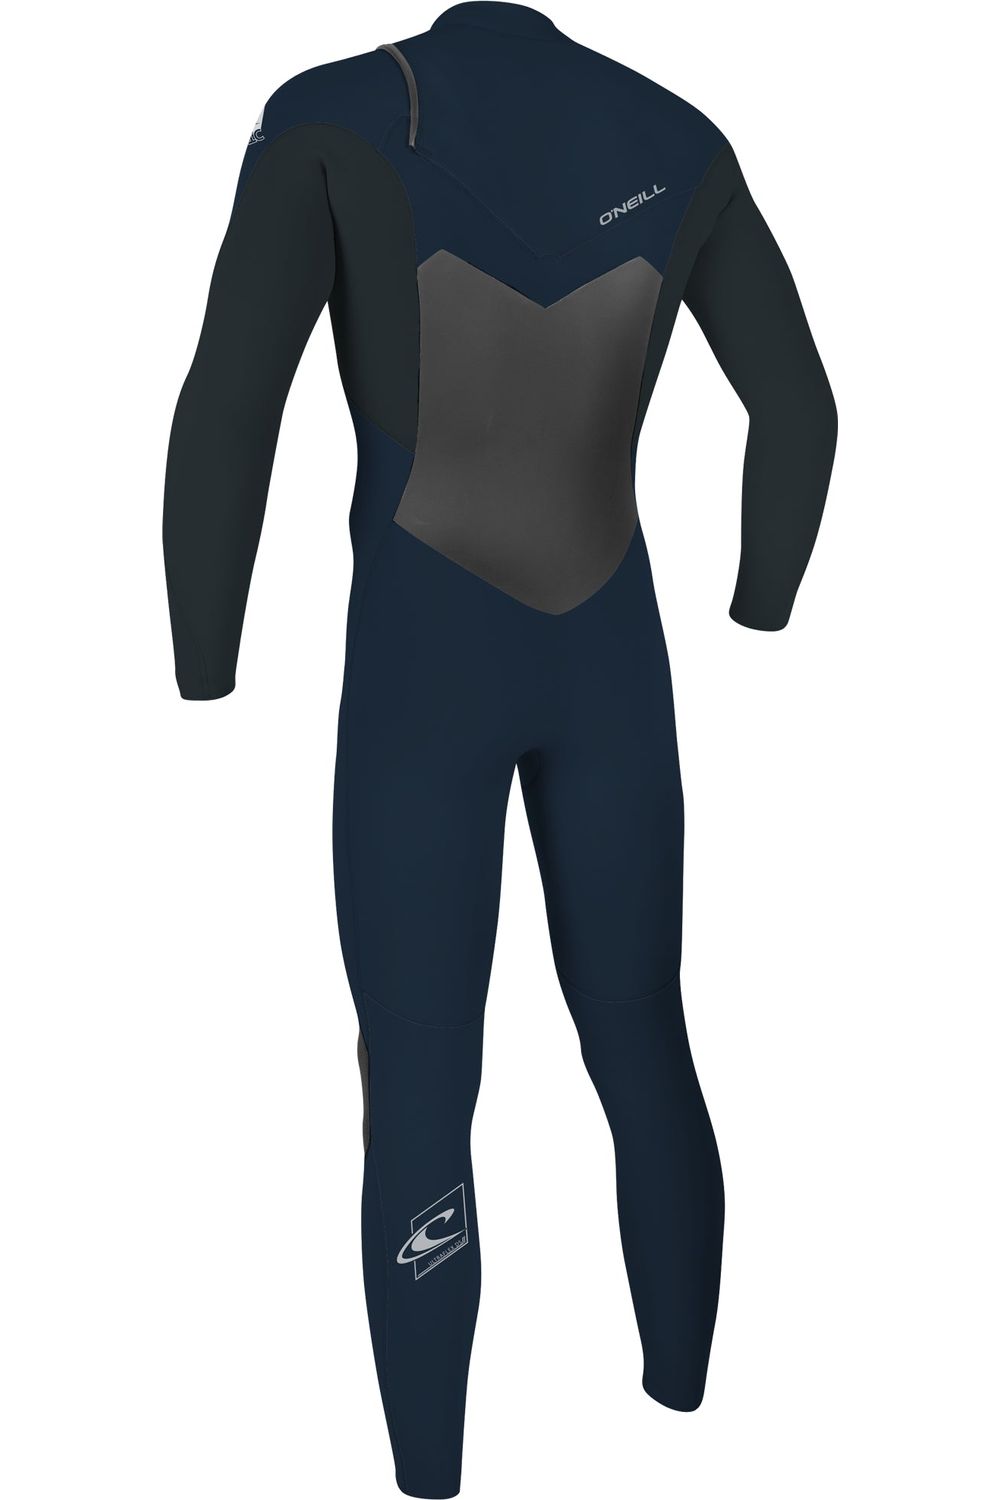 O'Neill Epic Wetsuit 4/3 Chest Zip Abyss Gunmetal